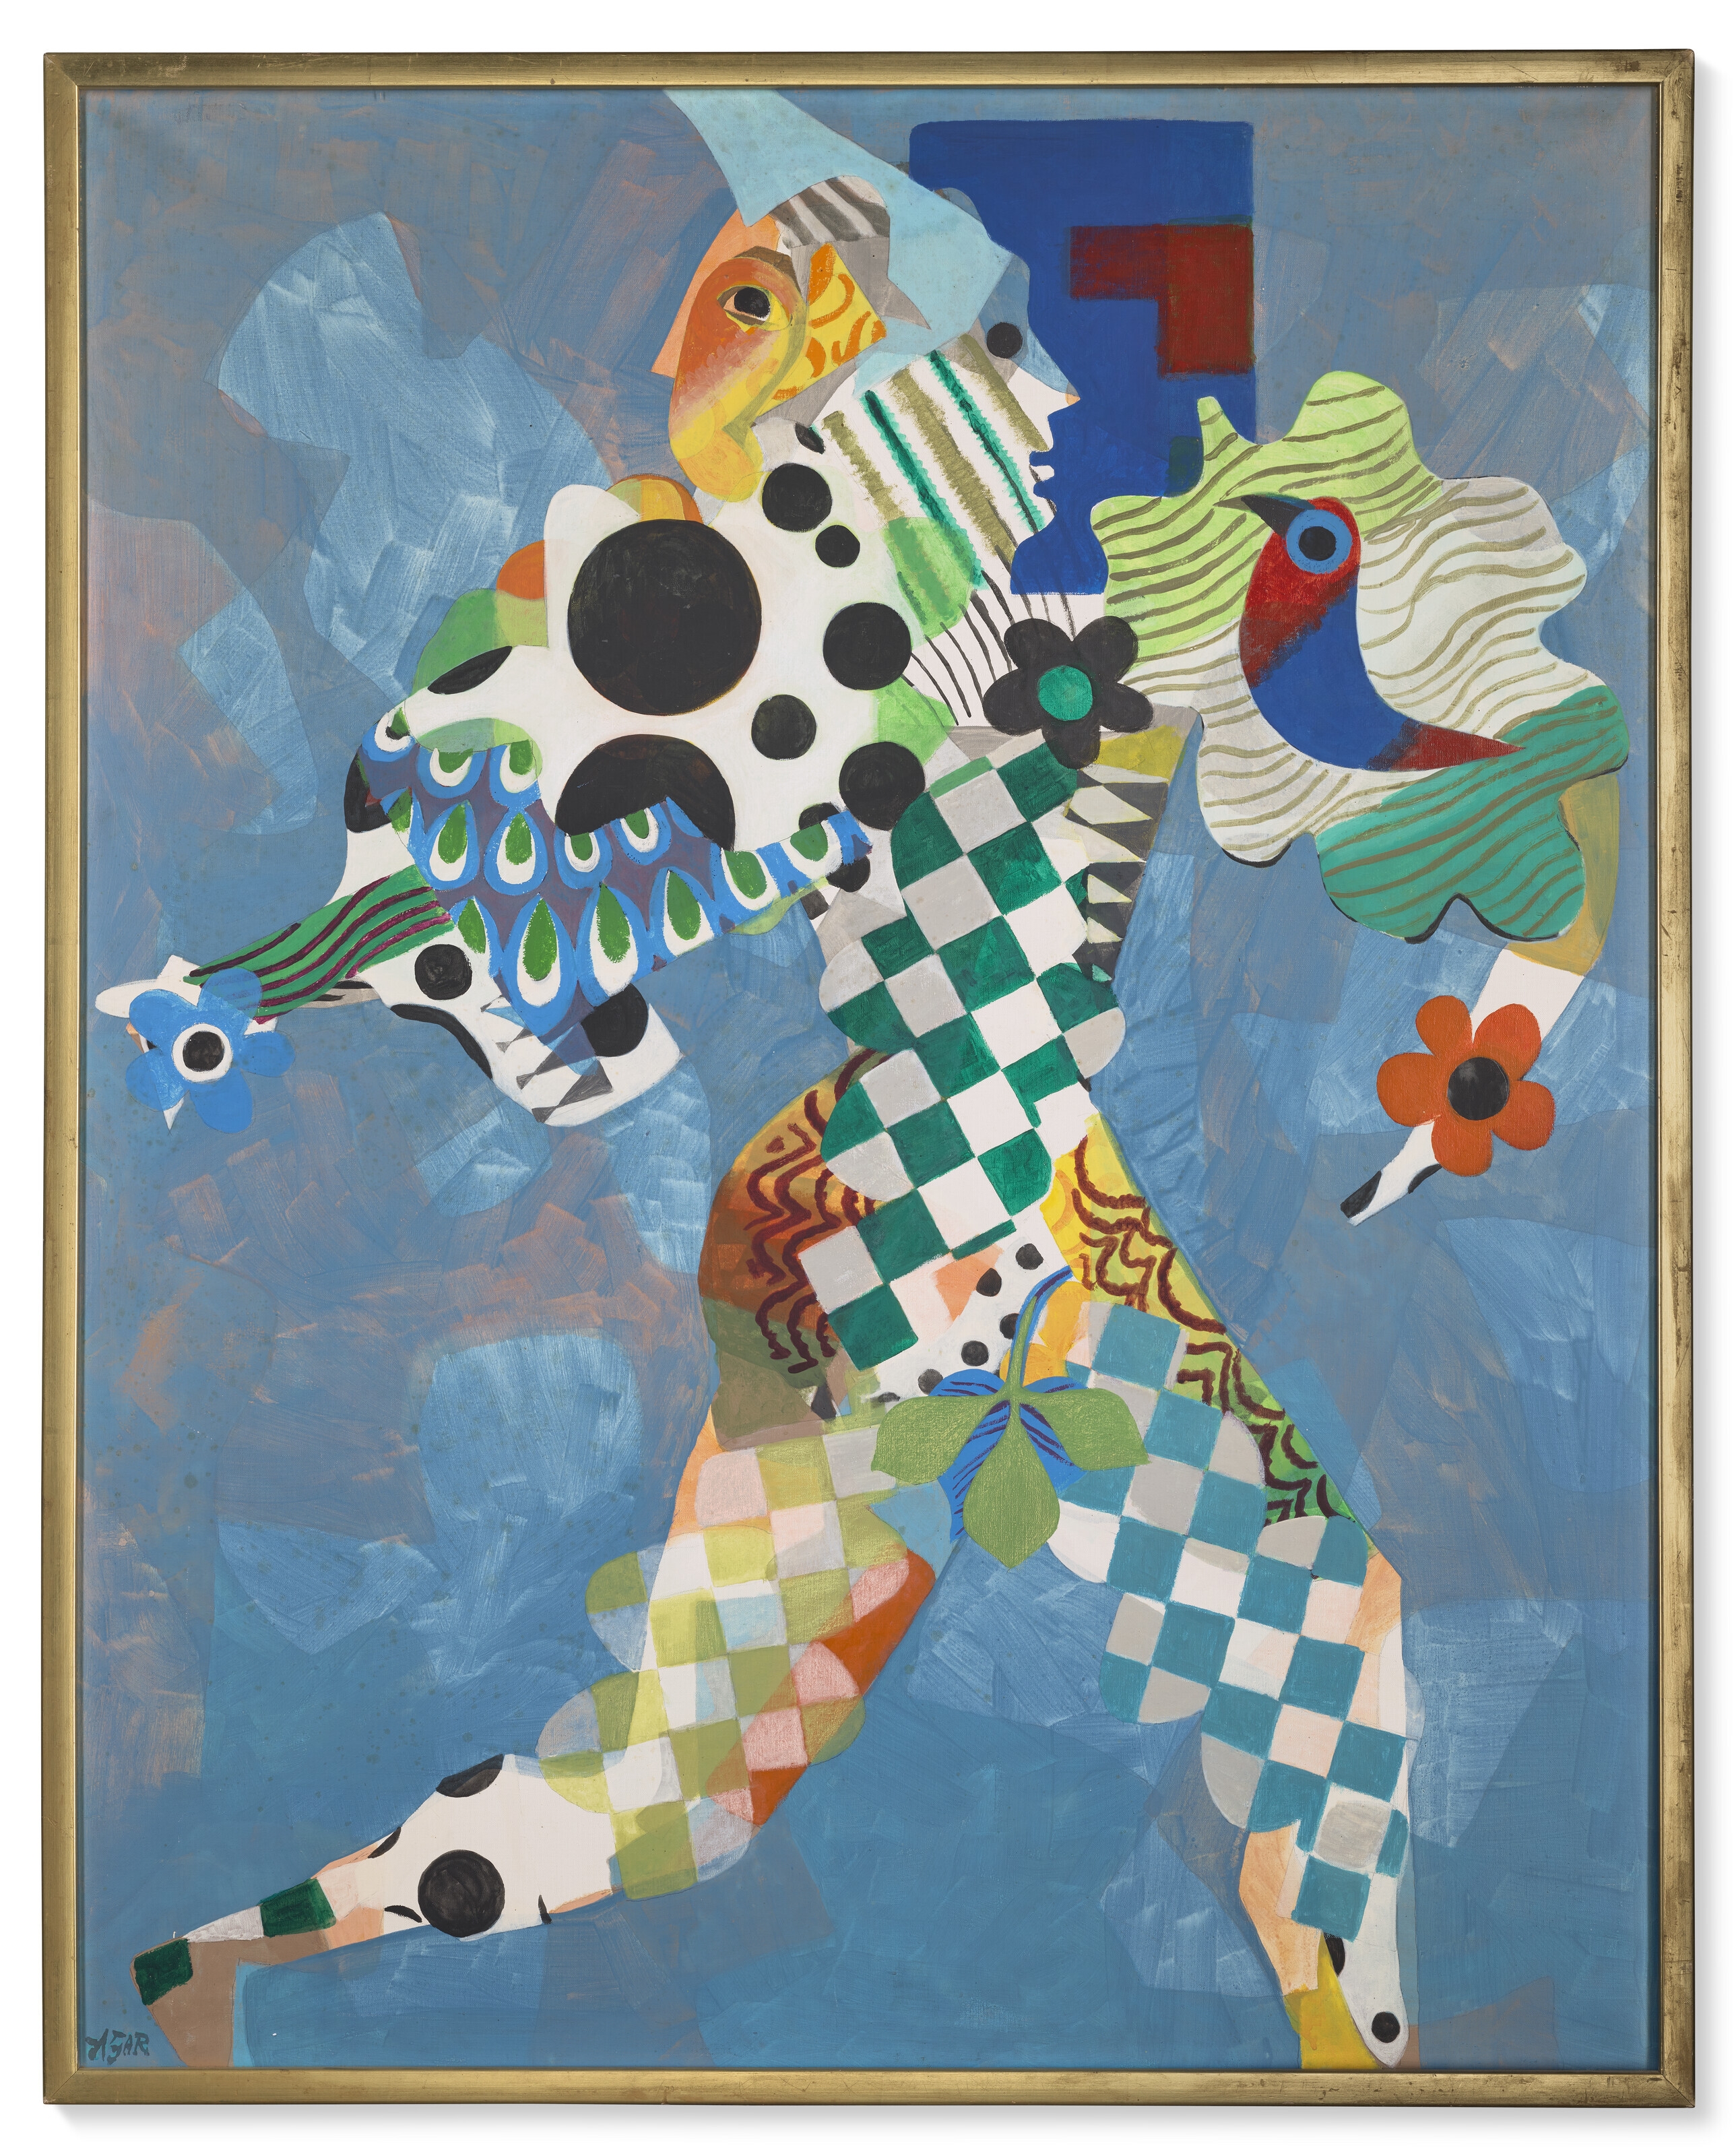 Artwork by Eileen Agar, Harlequin, Made of oil on canvas